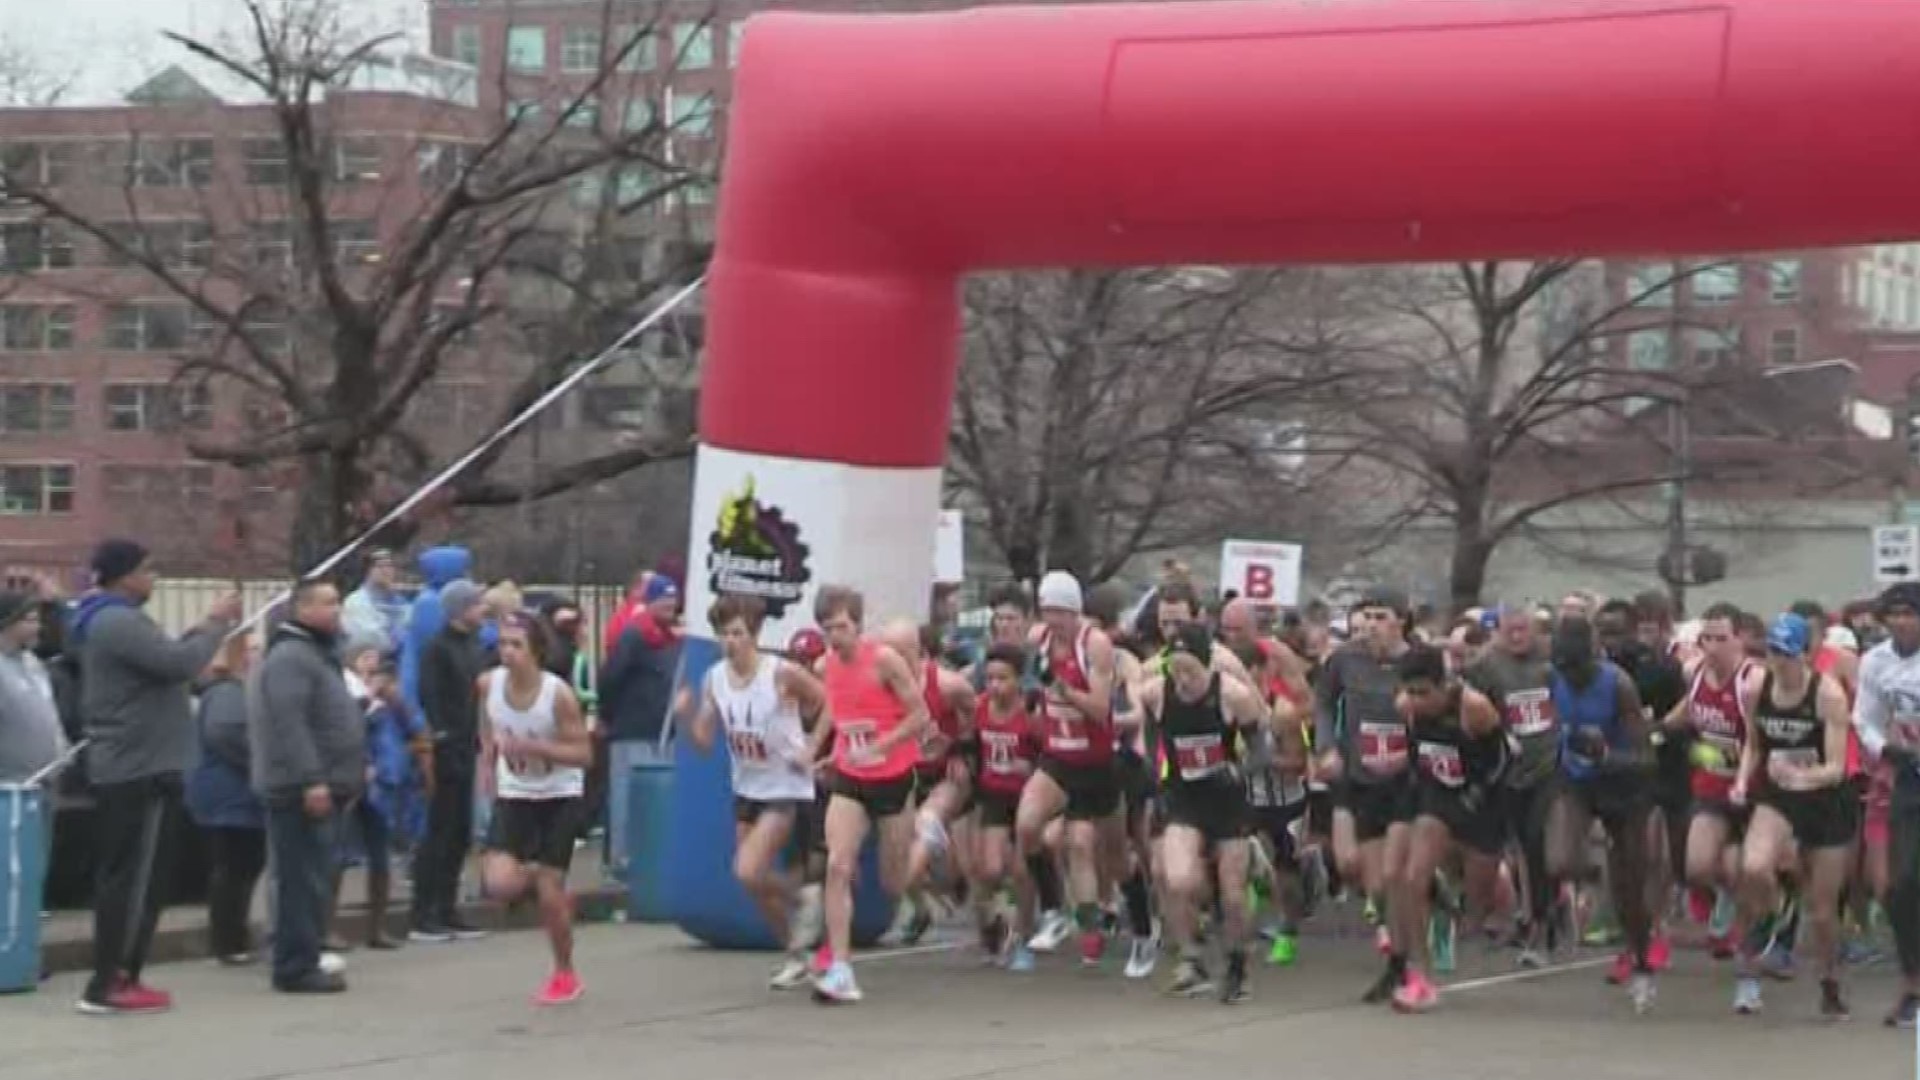 The first race in Louisville's Triple Crown of running is the Anthem 5K on February 23, 2019, then the Rodes City Run on March 9, 2019, followed by the Papa John's 10-Miler on March 23, 2019.